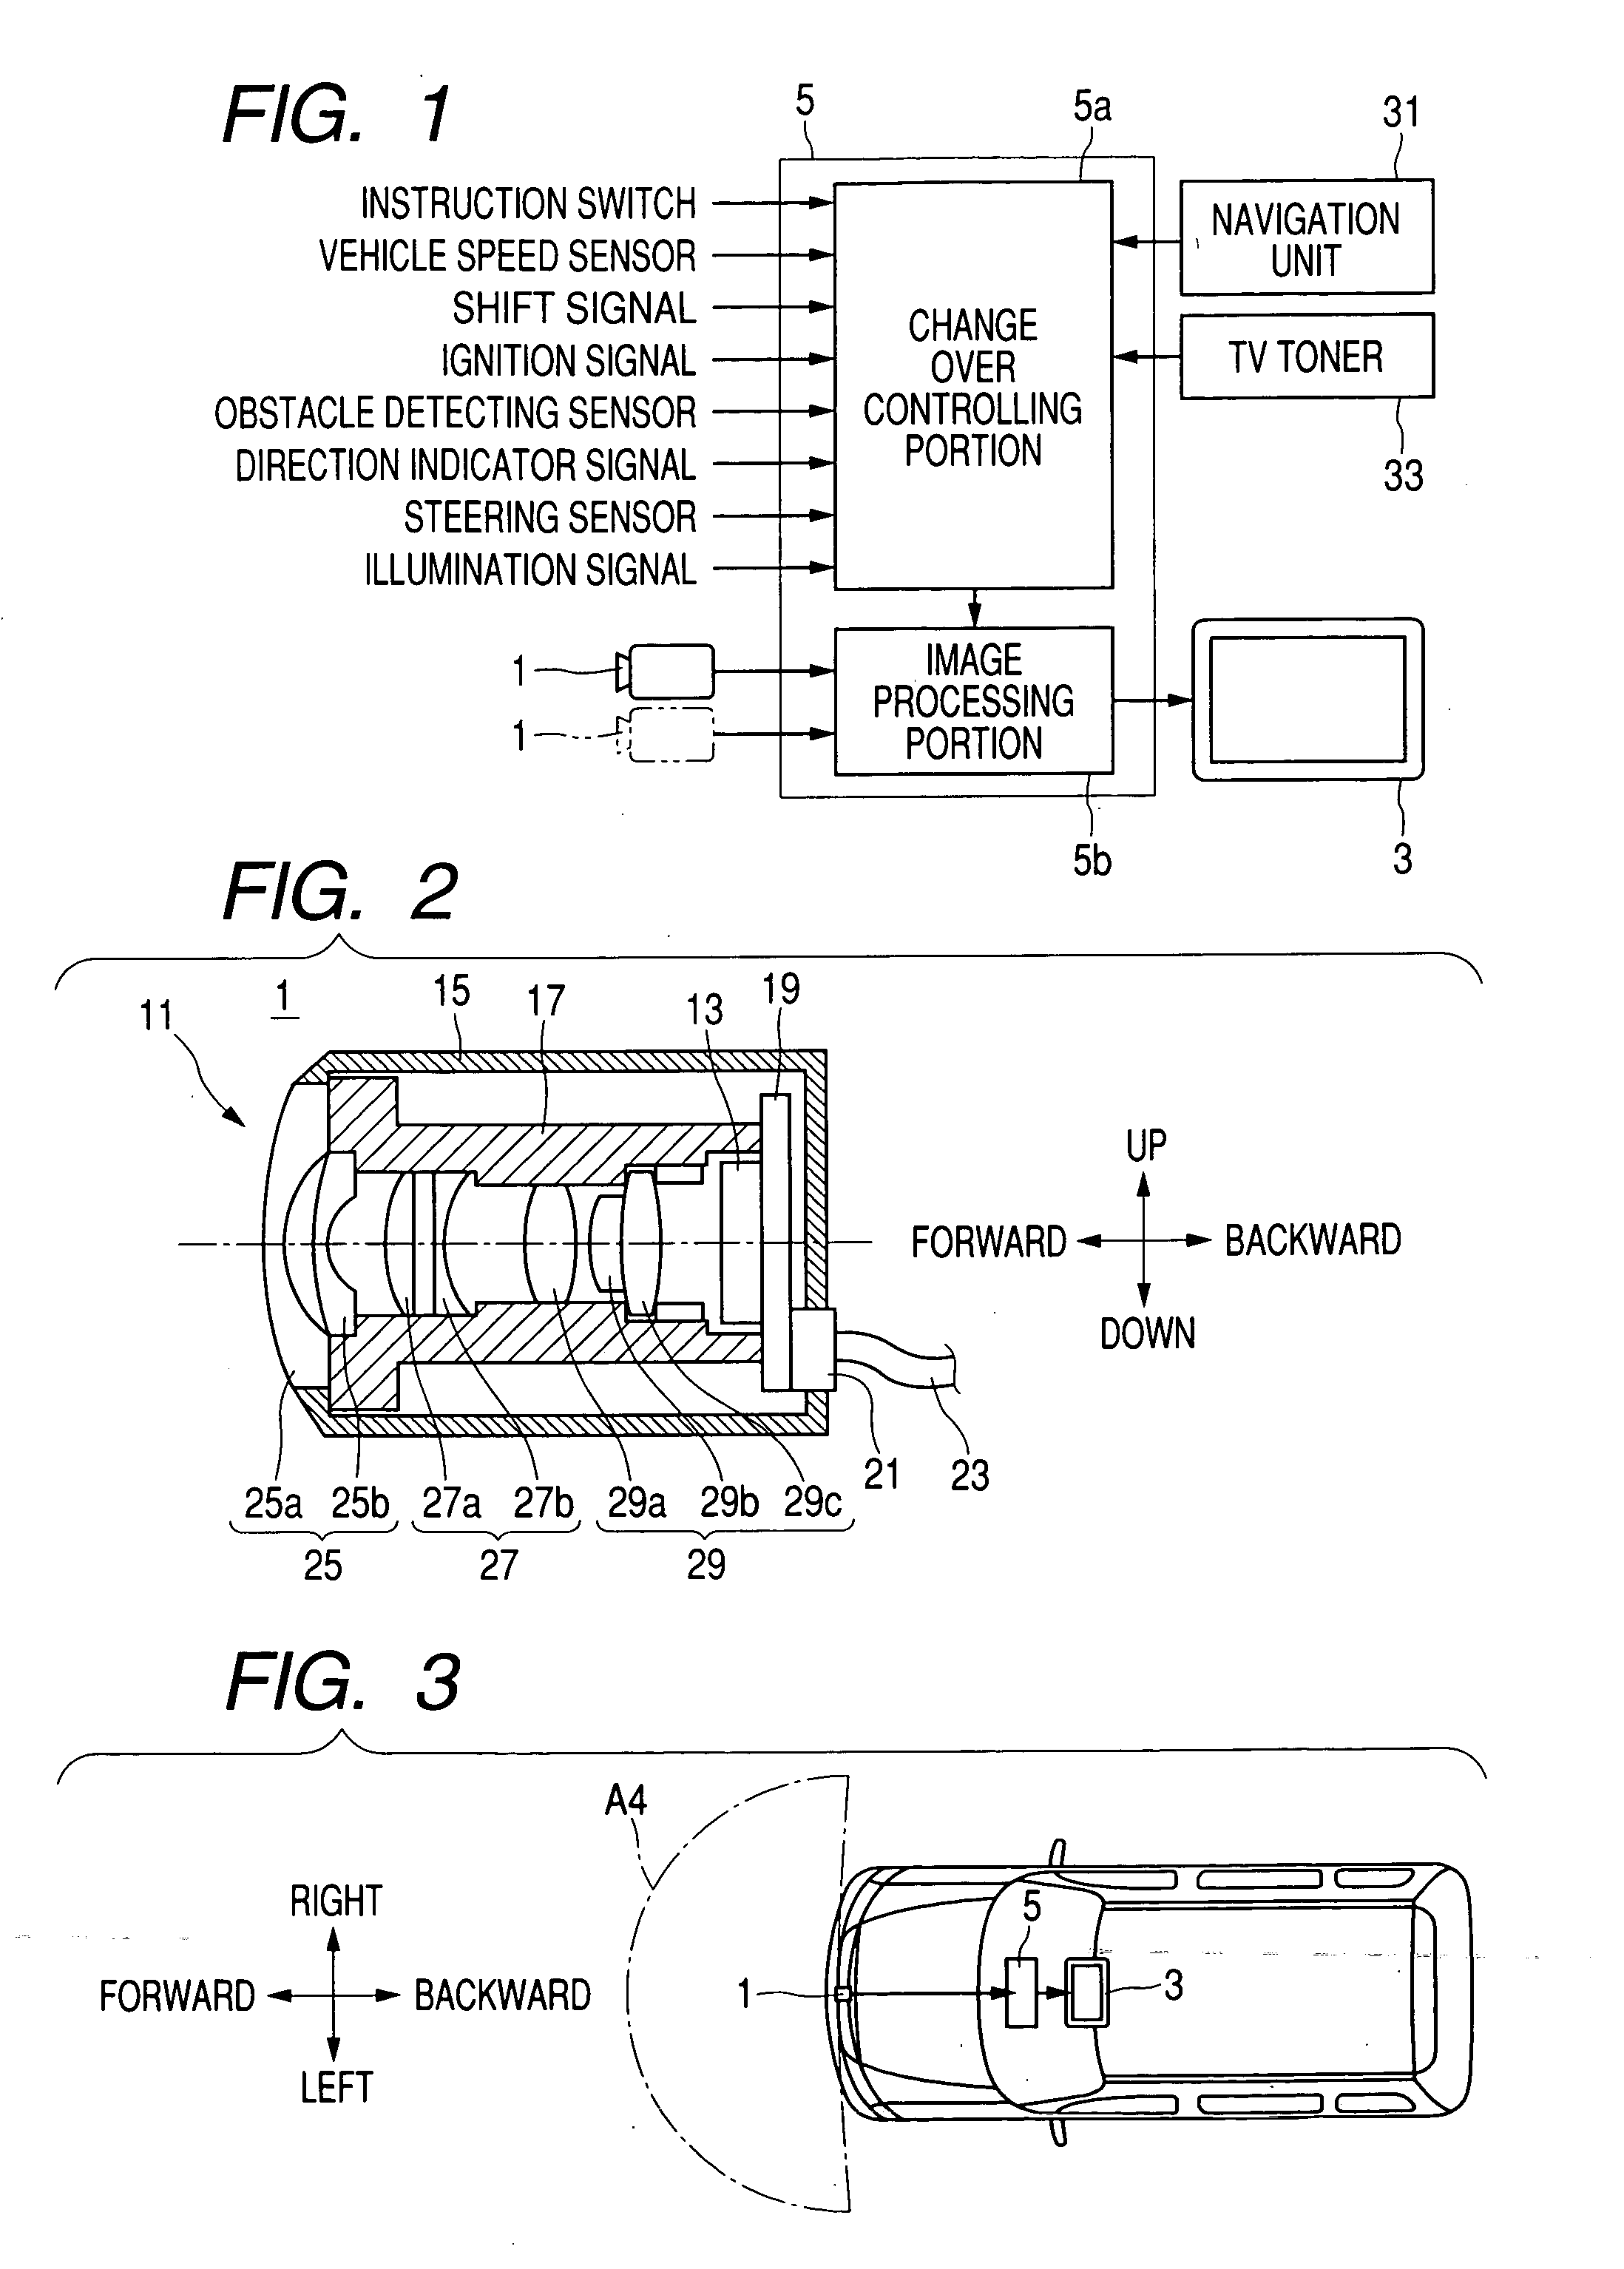 Camera unit and apparatus for monitoring vehicle periphery